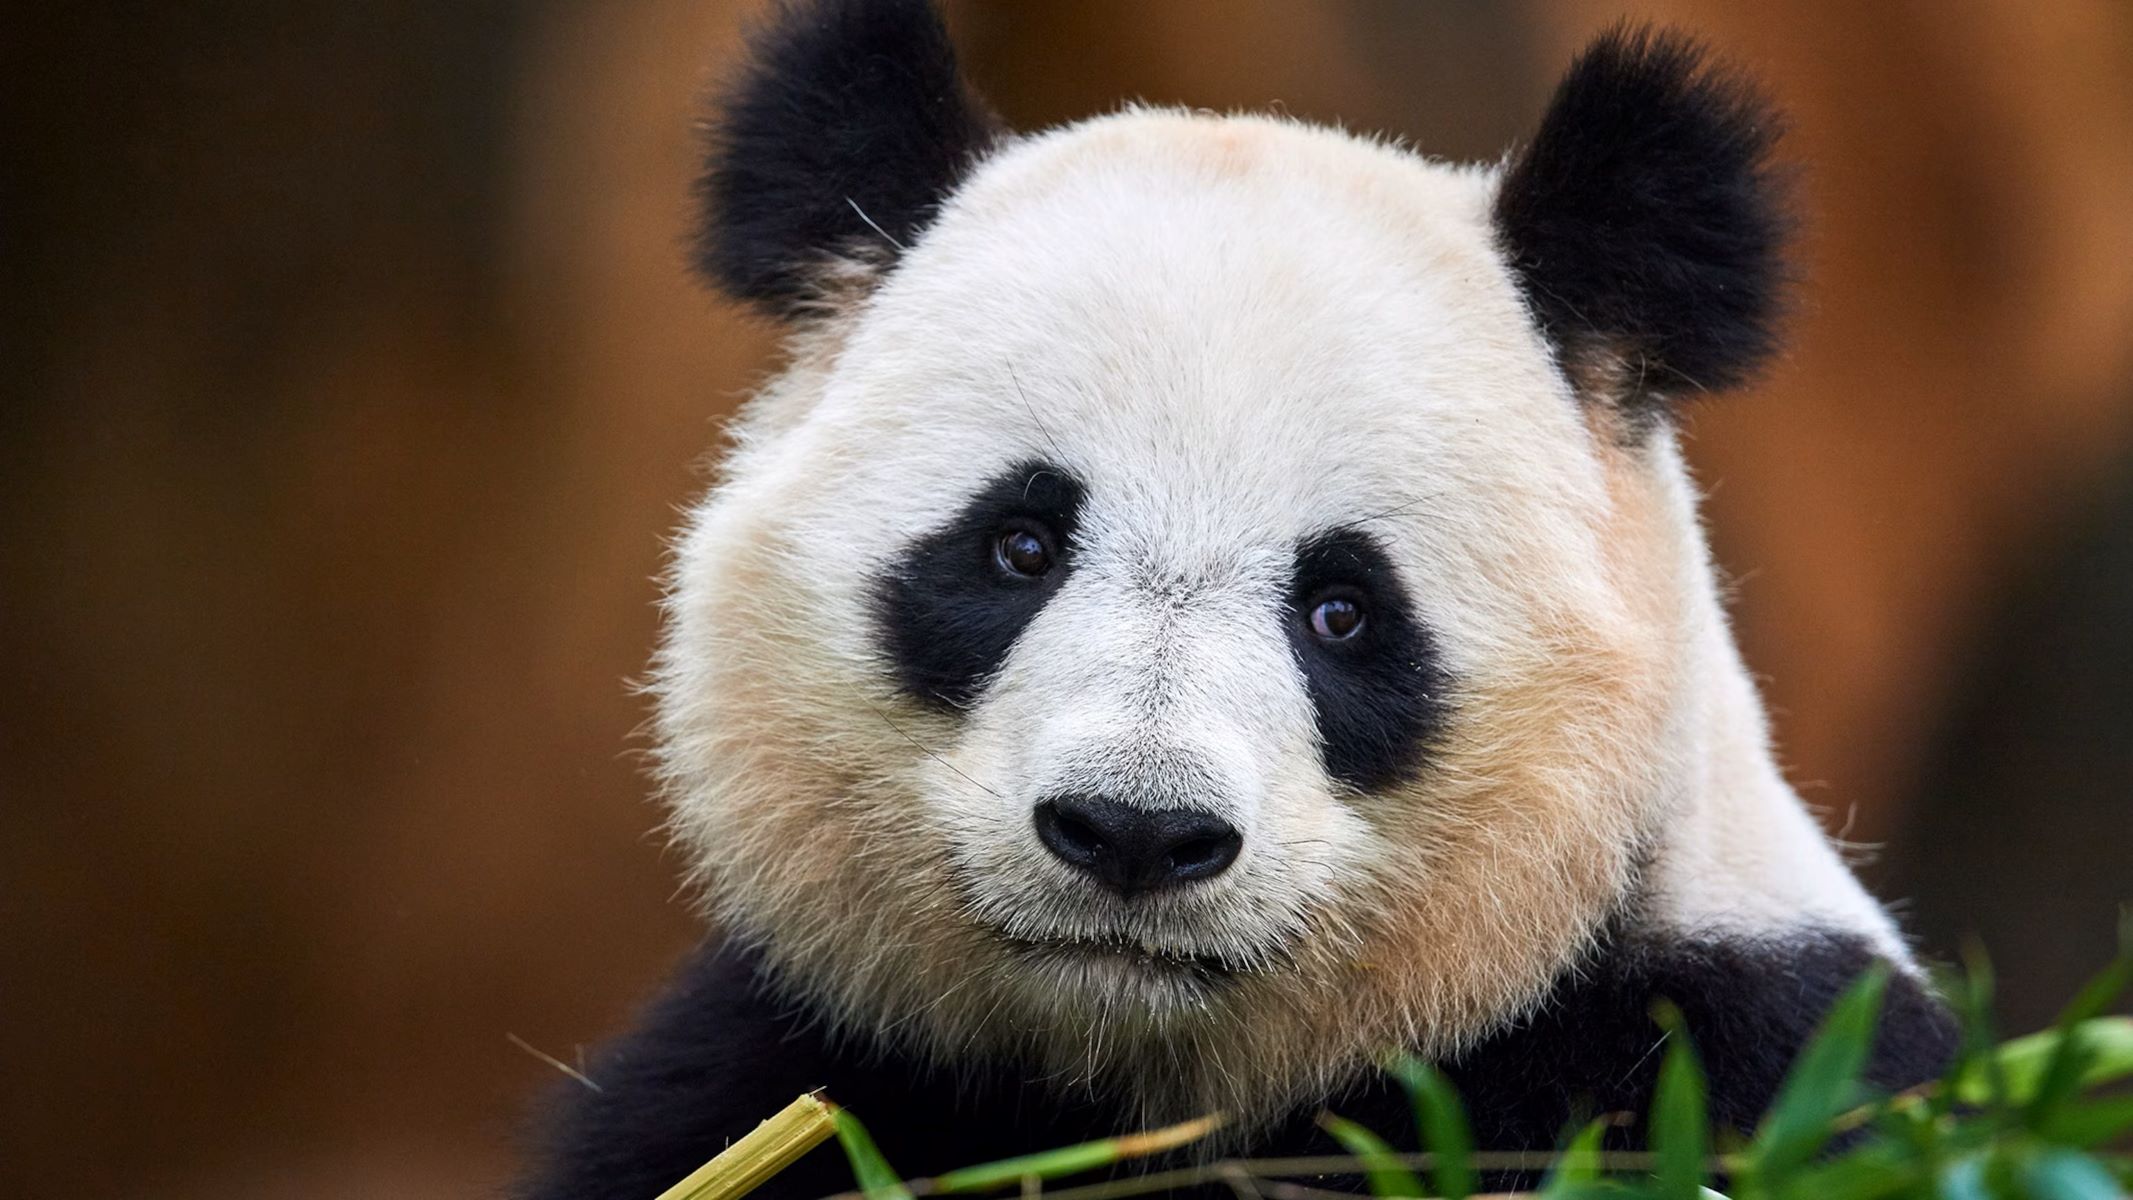 The Shocking Price Tag Of Owning A Panda Revealed!